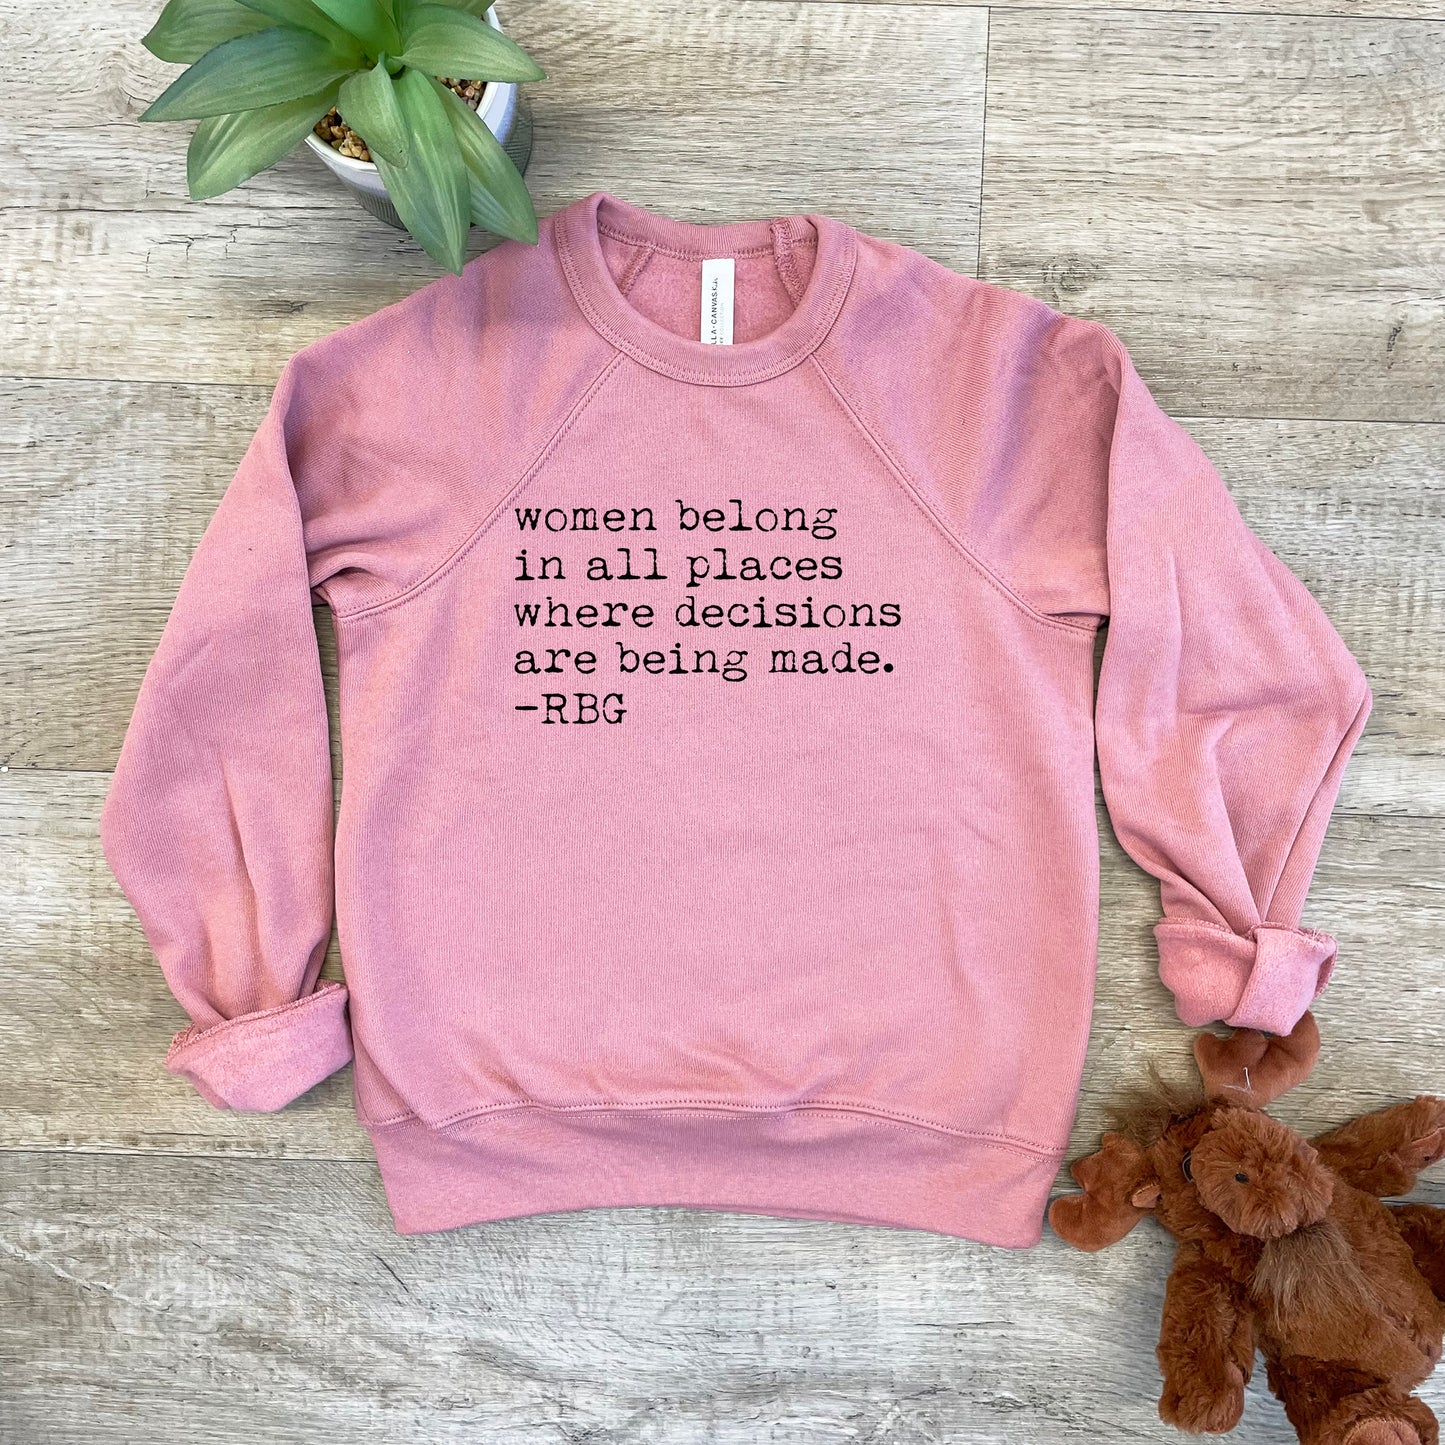 Women Belong In All Places Where Decisions Are Being Made - RBG - Kid's Sweatshirt - Heather Gray or Mauve